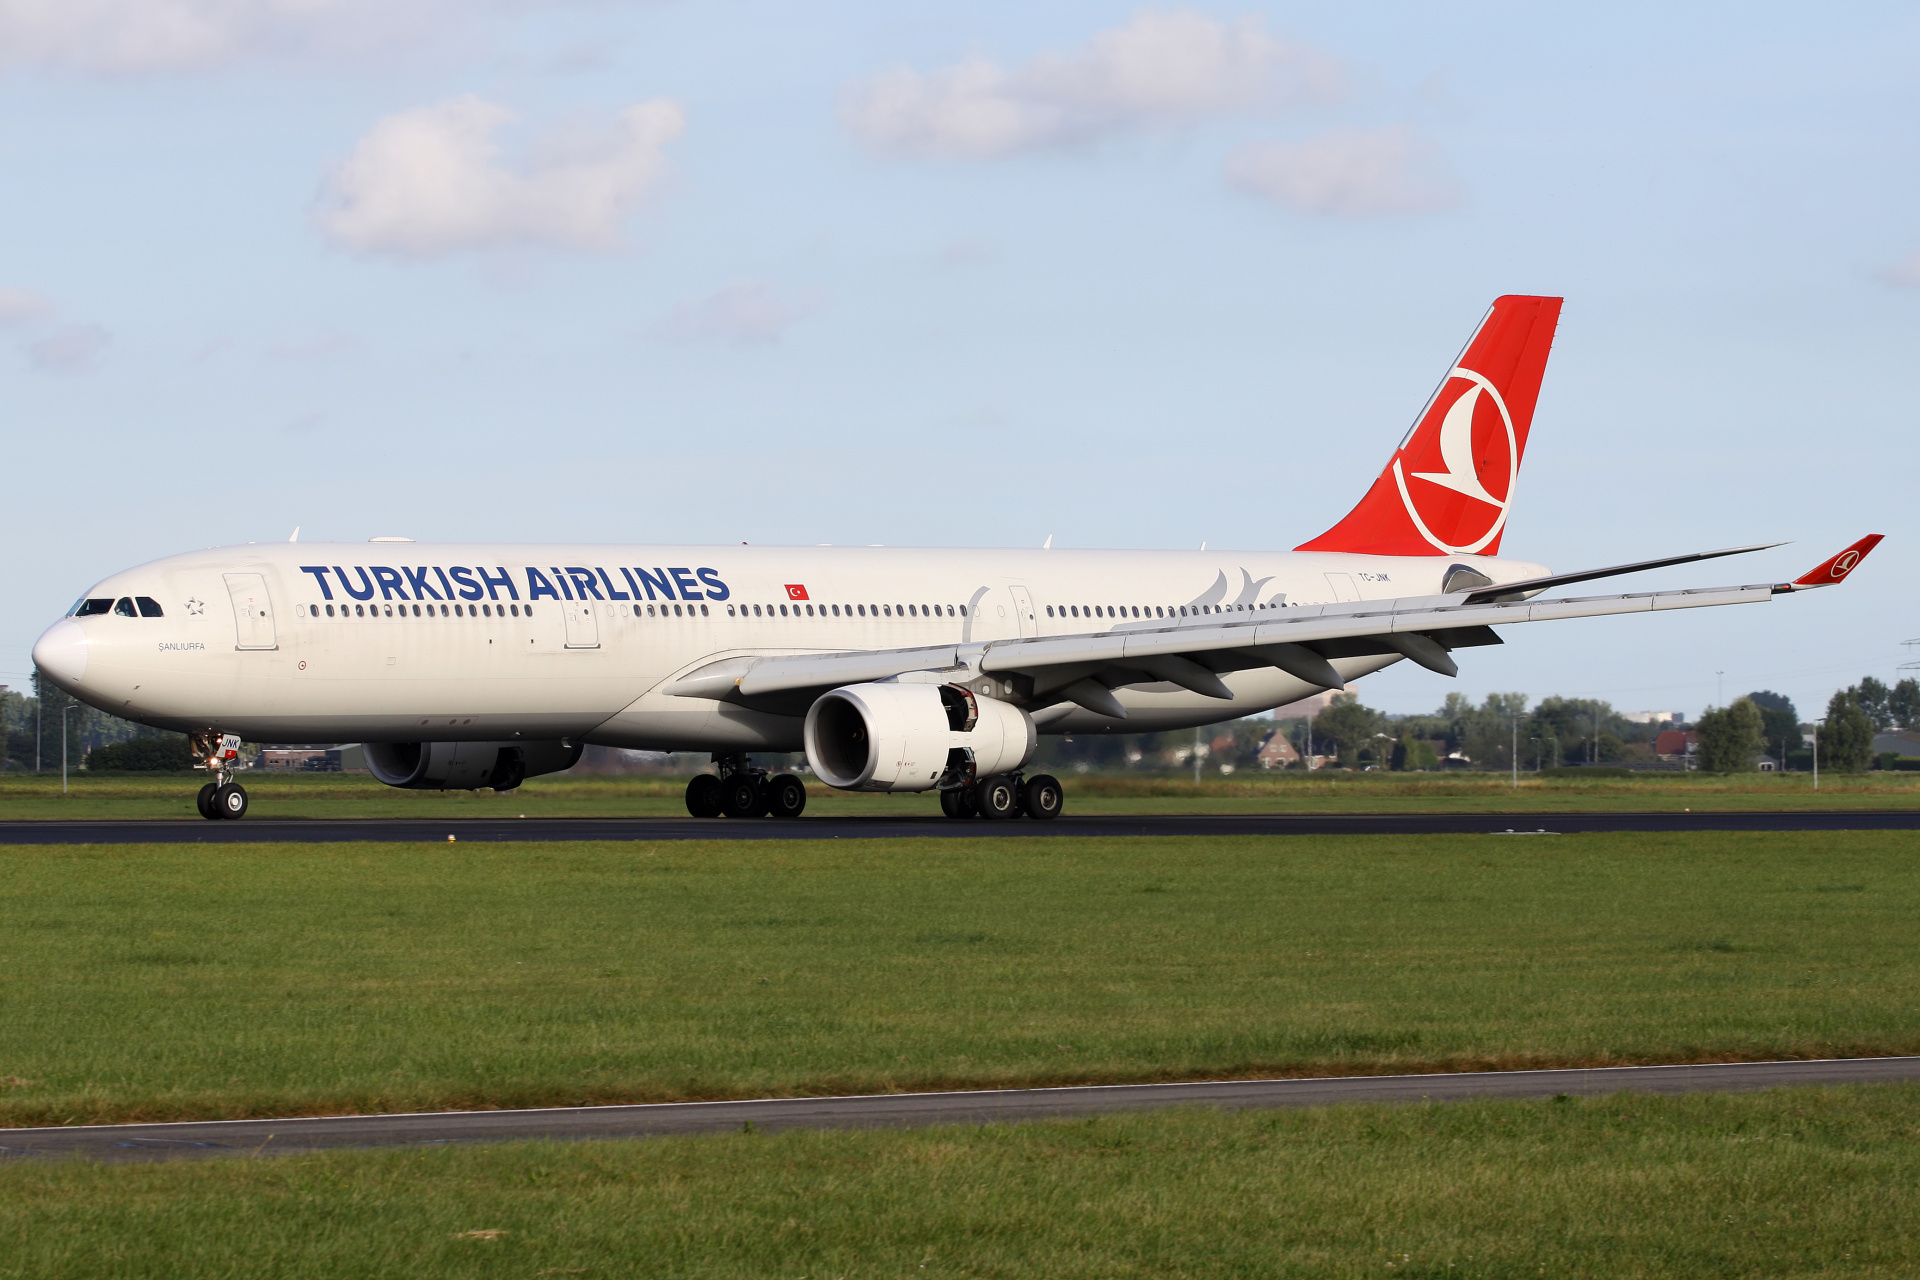 TC-JNK, THY Turkish Airlines (Aircraft » Schiphol Spotting » Airbus A330-300)